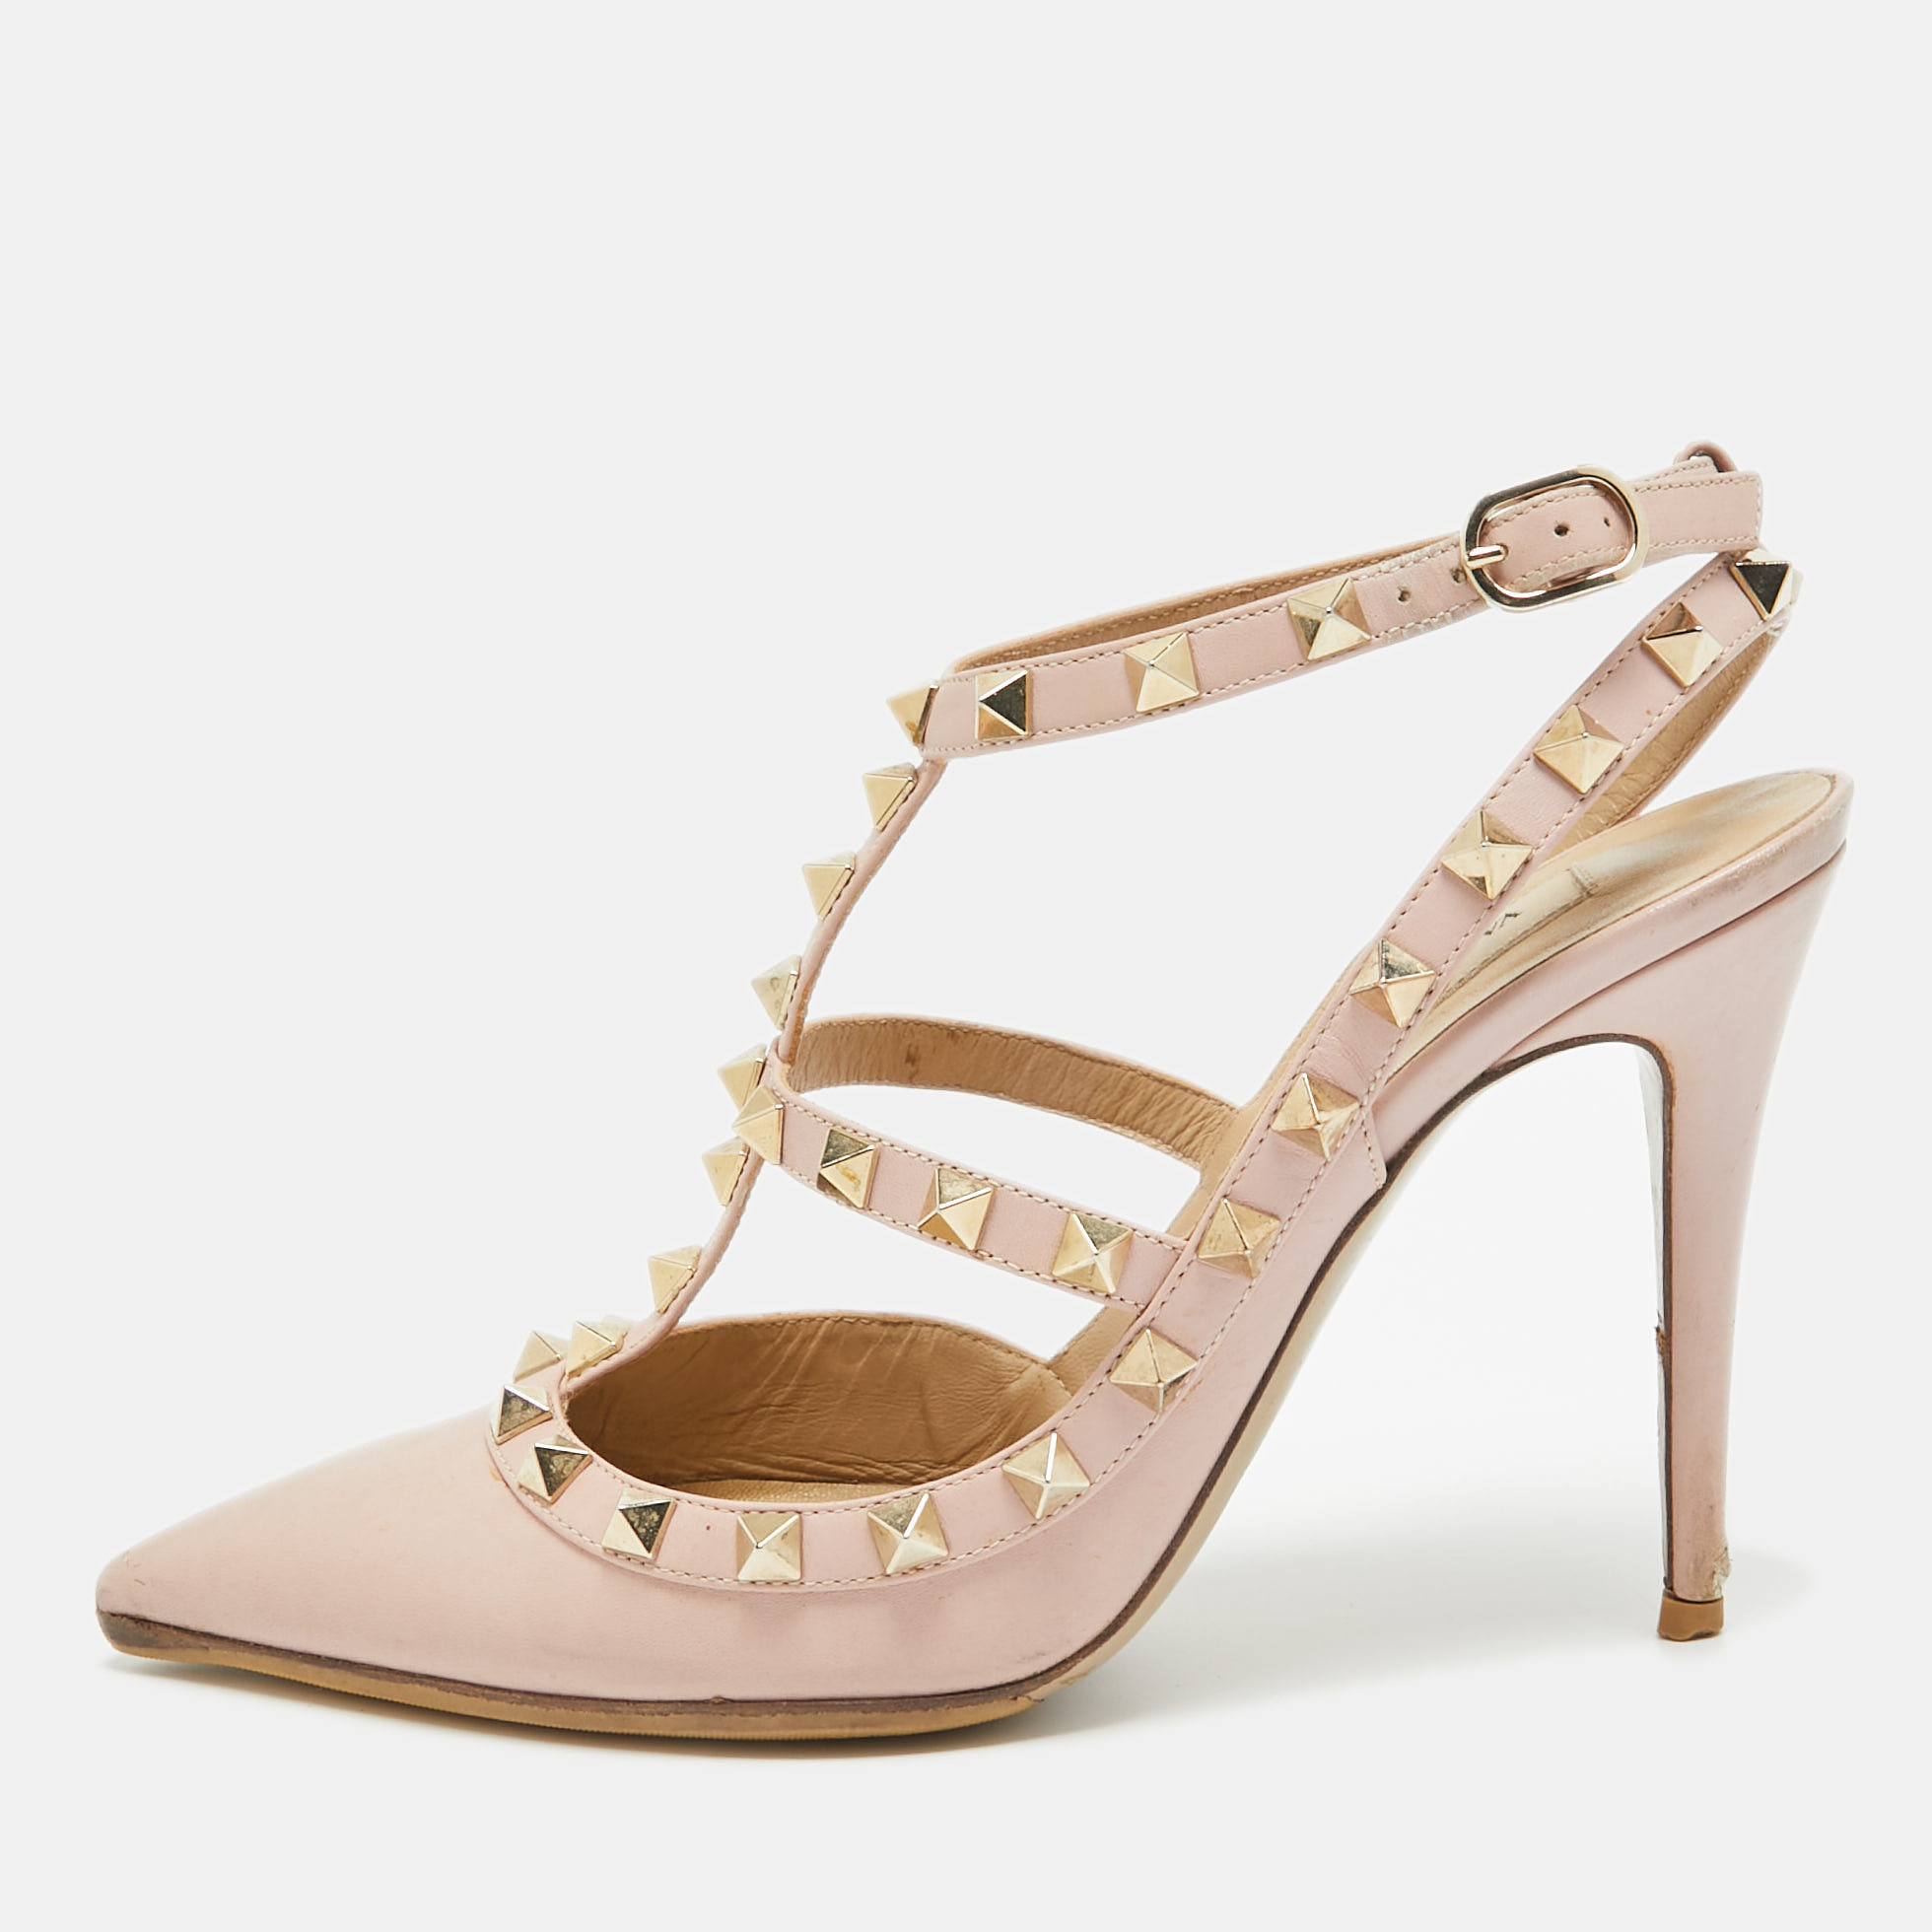 Perfectly sewn and finished to ensure an elegant look and fit these Valentino shoes are a purchase youll love flaunting. They look great on the feet.